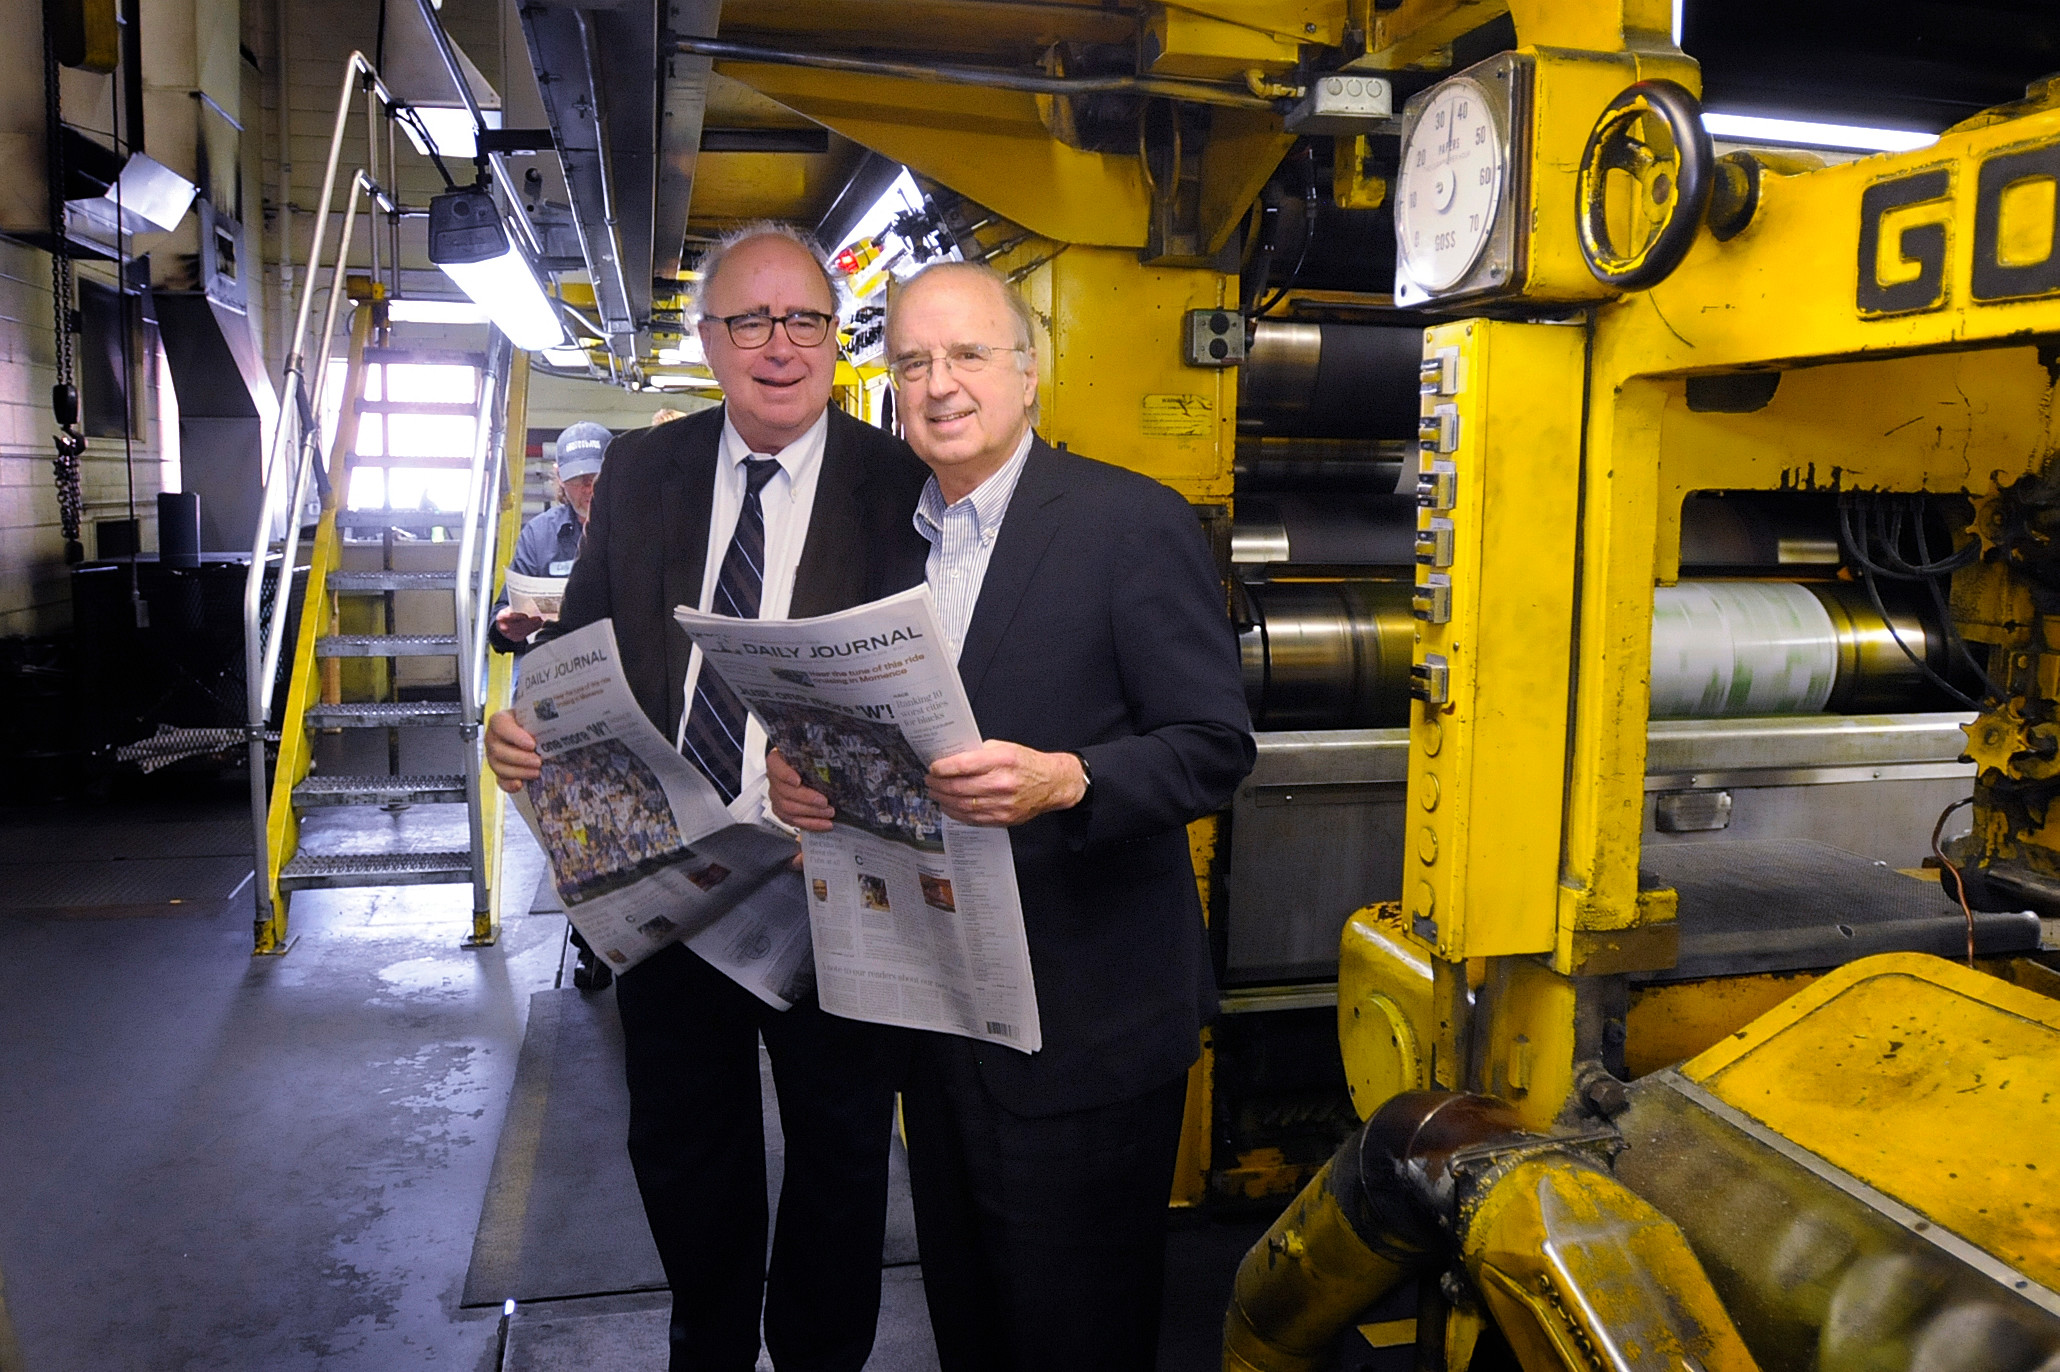 Tom and Rob Small get their first look at the redesign of the (Kankakee, Ill.) Daily Journal in the press room of launch day.